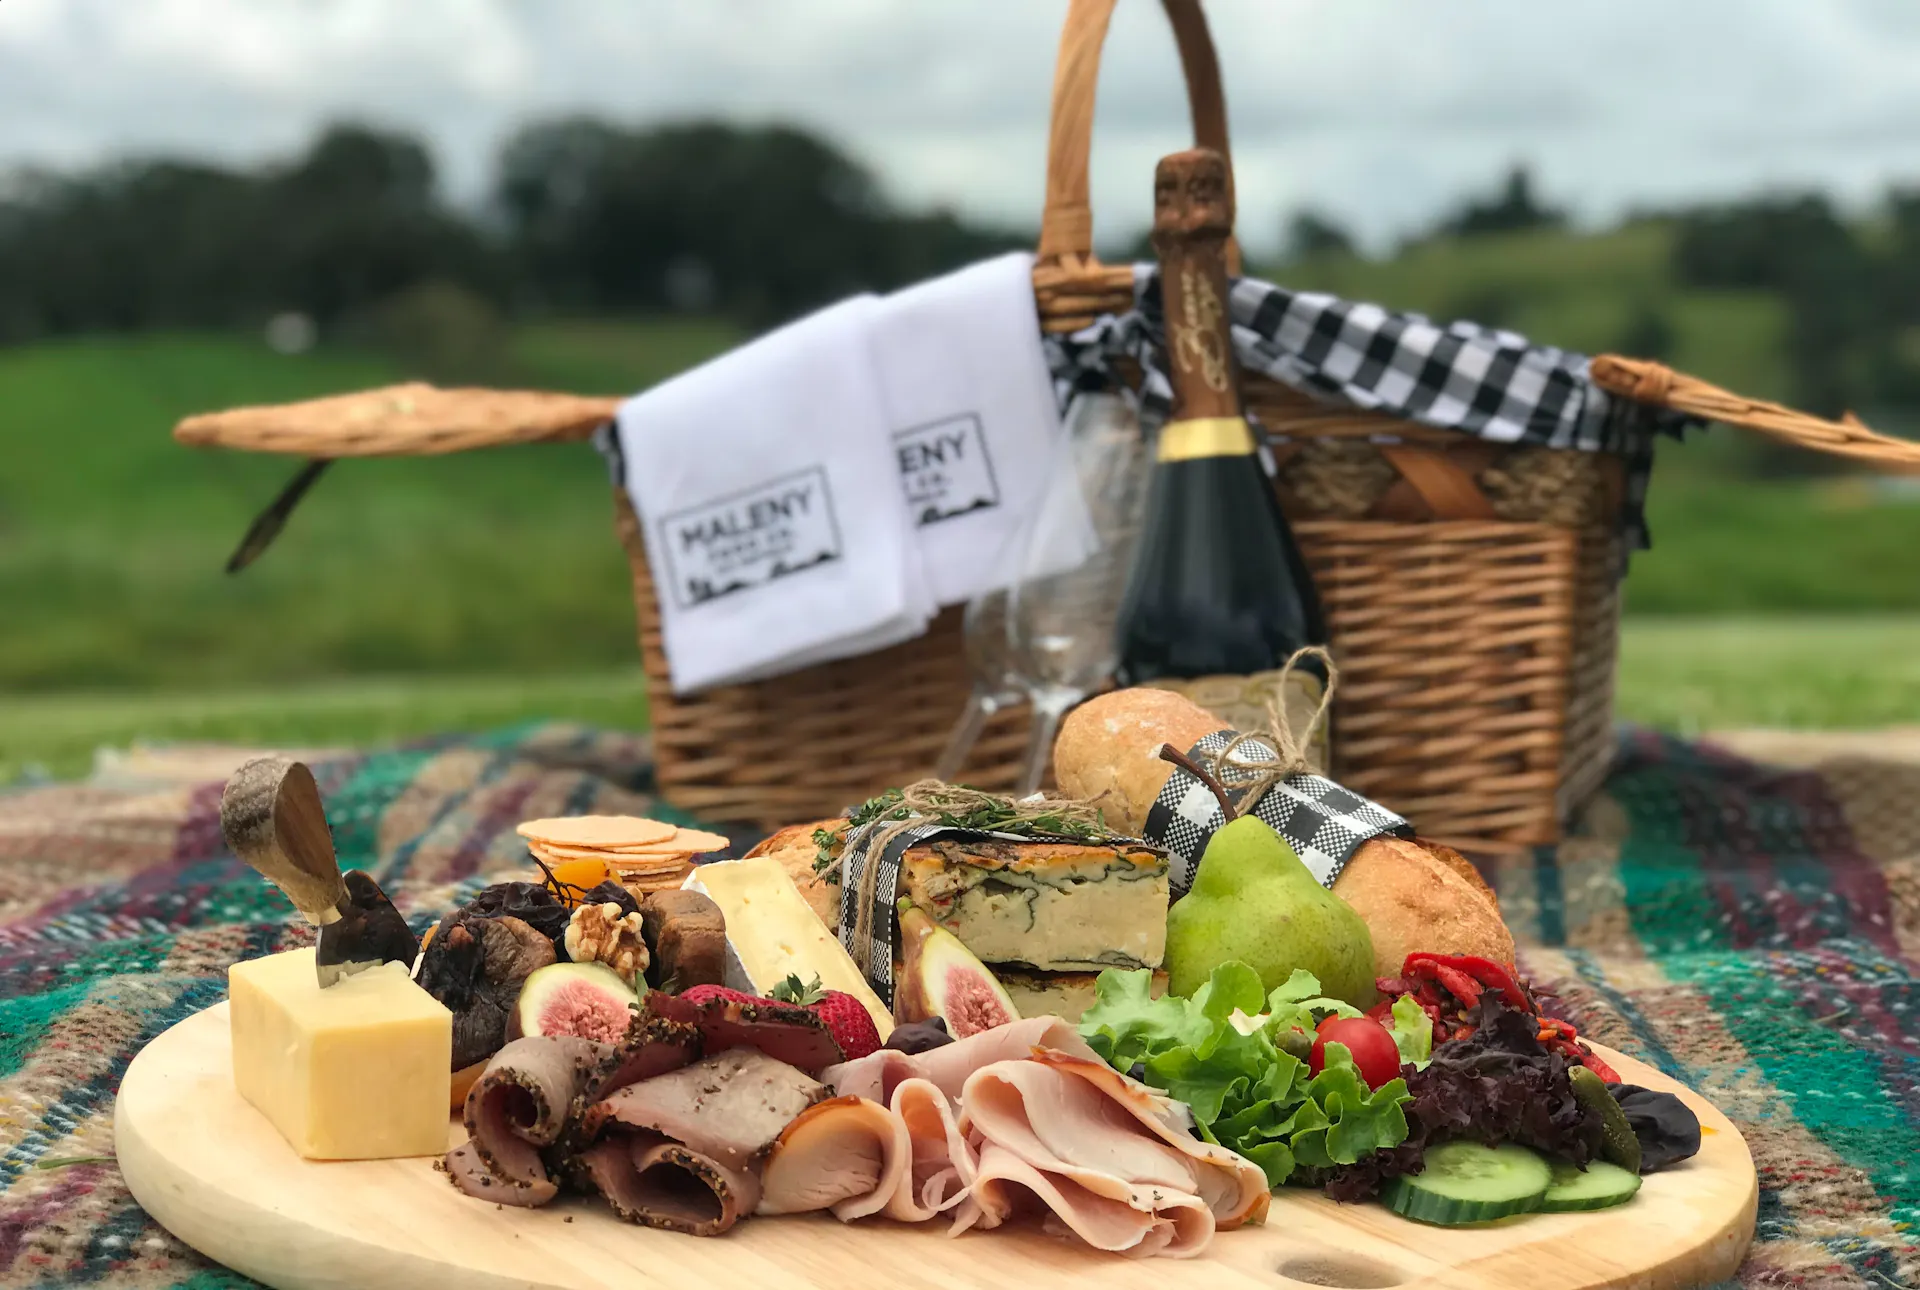 Picnic hamper including cheese and meats from our fromagerie  and a bottle of champagne.